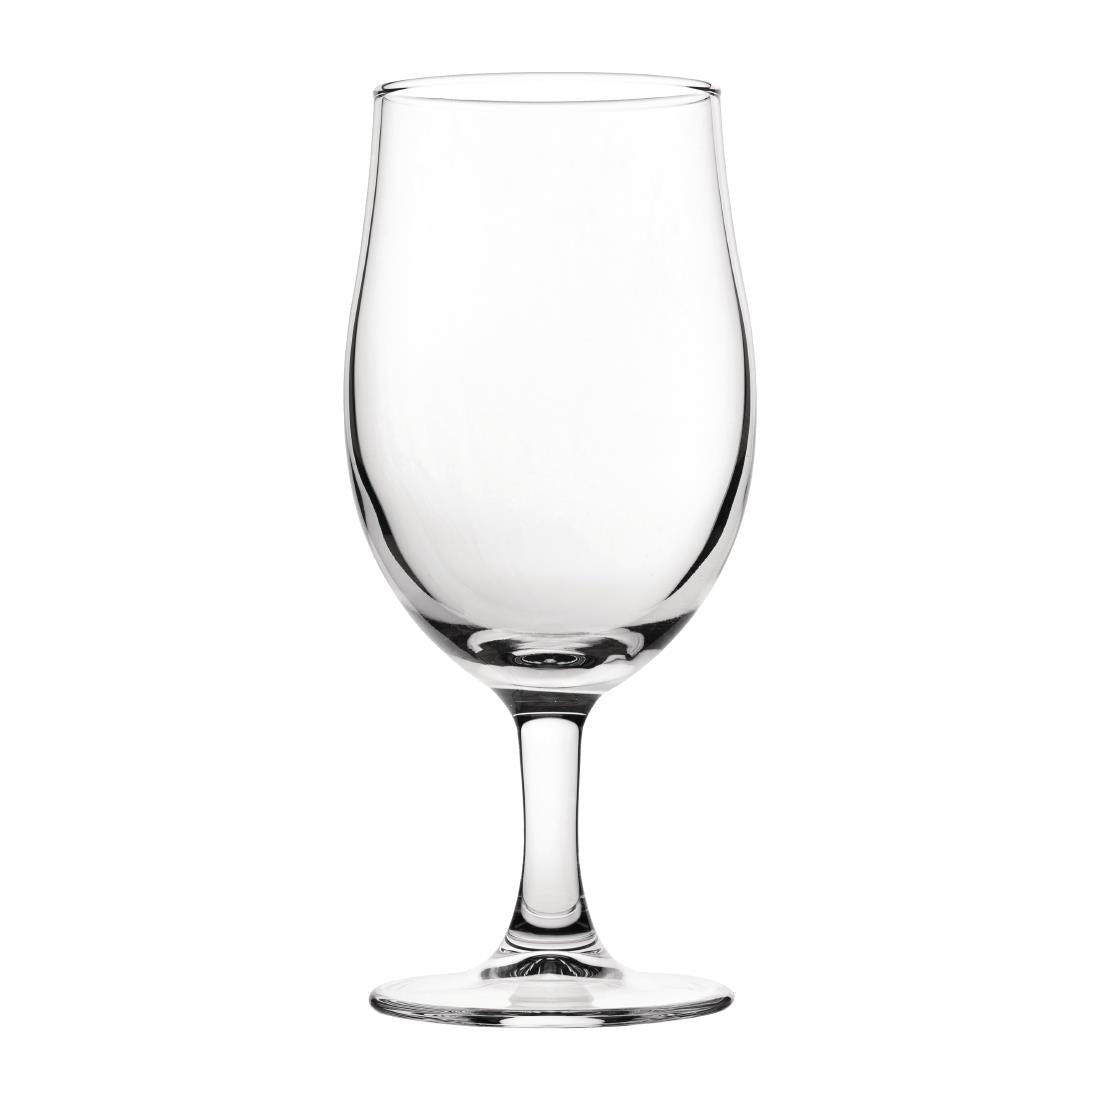 CY329 Utopia Nucleated Toughened Draught Beer Glasses 570ml CE Marked (Pack of 12) JD Catering Equipment Solutions Ltd